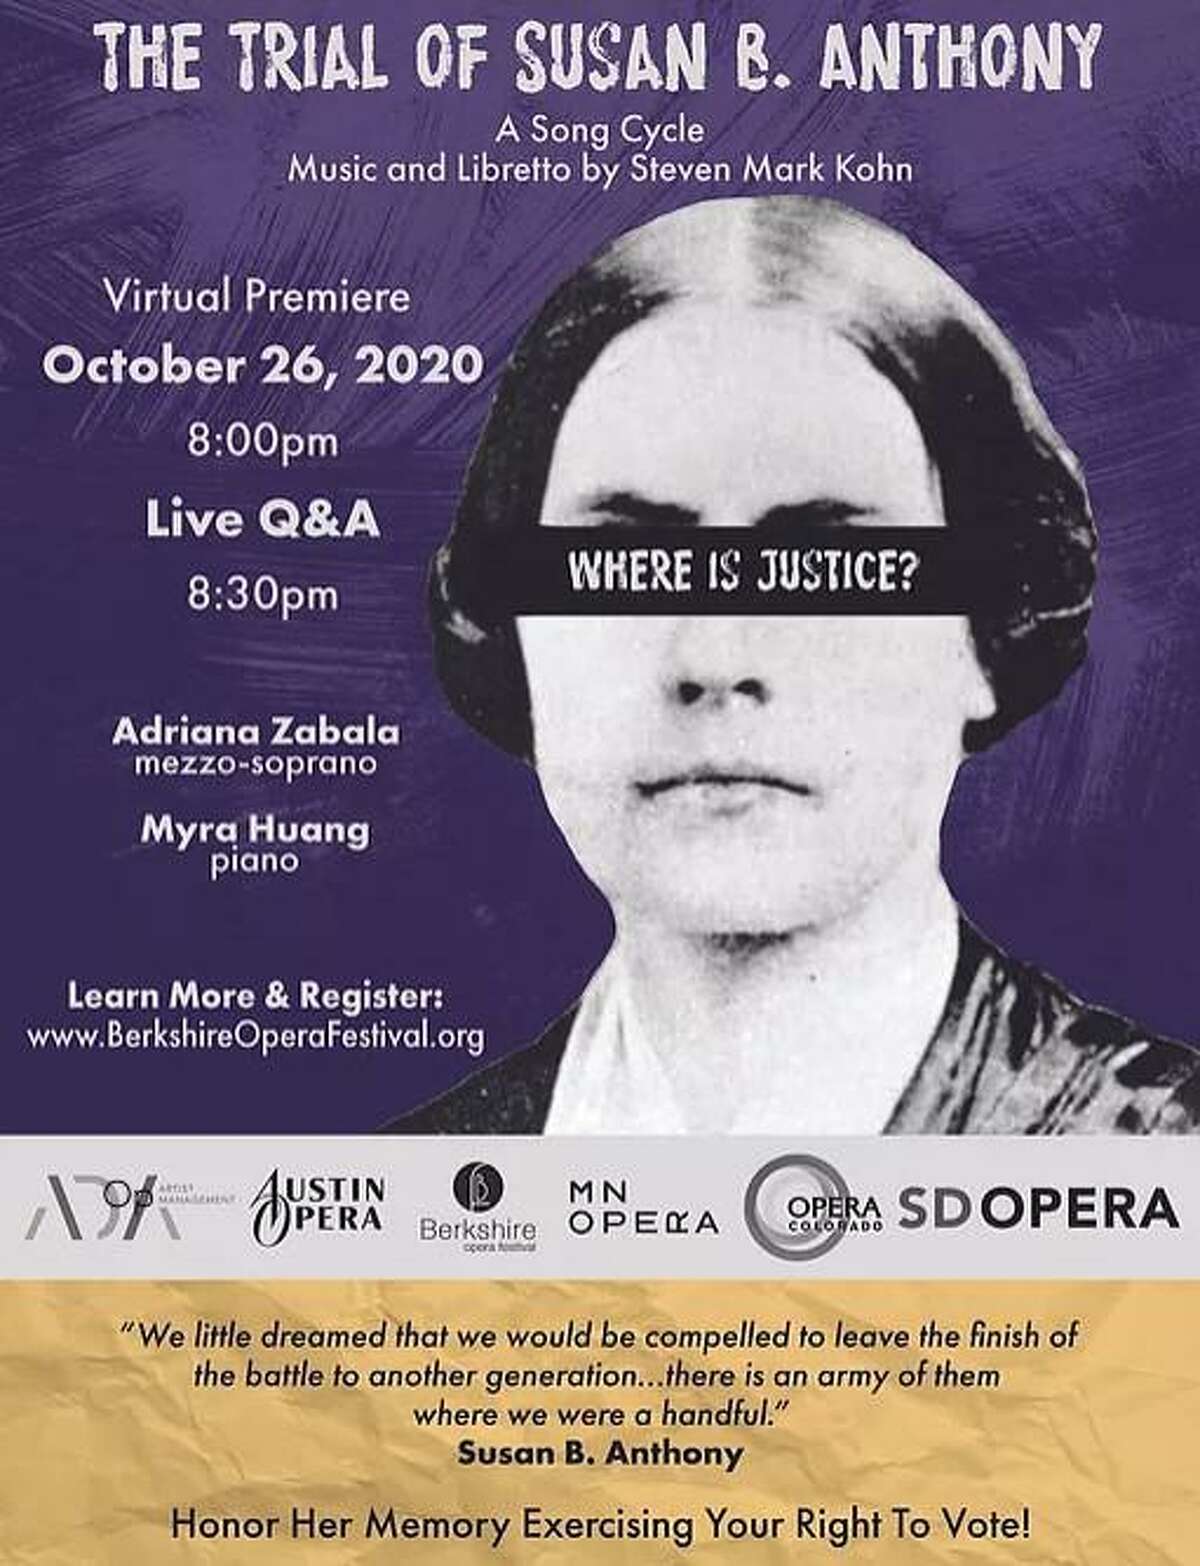 ADA Artist Management (ADA), along with co-producers Berkshire Opera Festival, Austin Opera, Minnesota Opera, Opera Colorado, and San Diego Opera, announces the world premiere of Steven Mark Kohn’s song cycle “The Trial of Susan B. Anthony.”